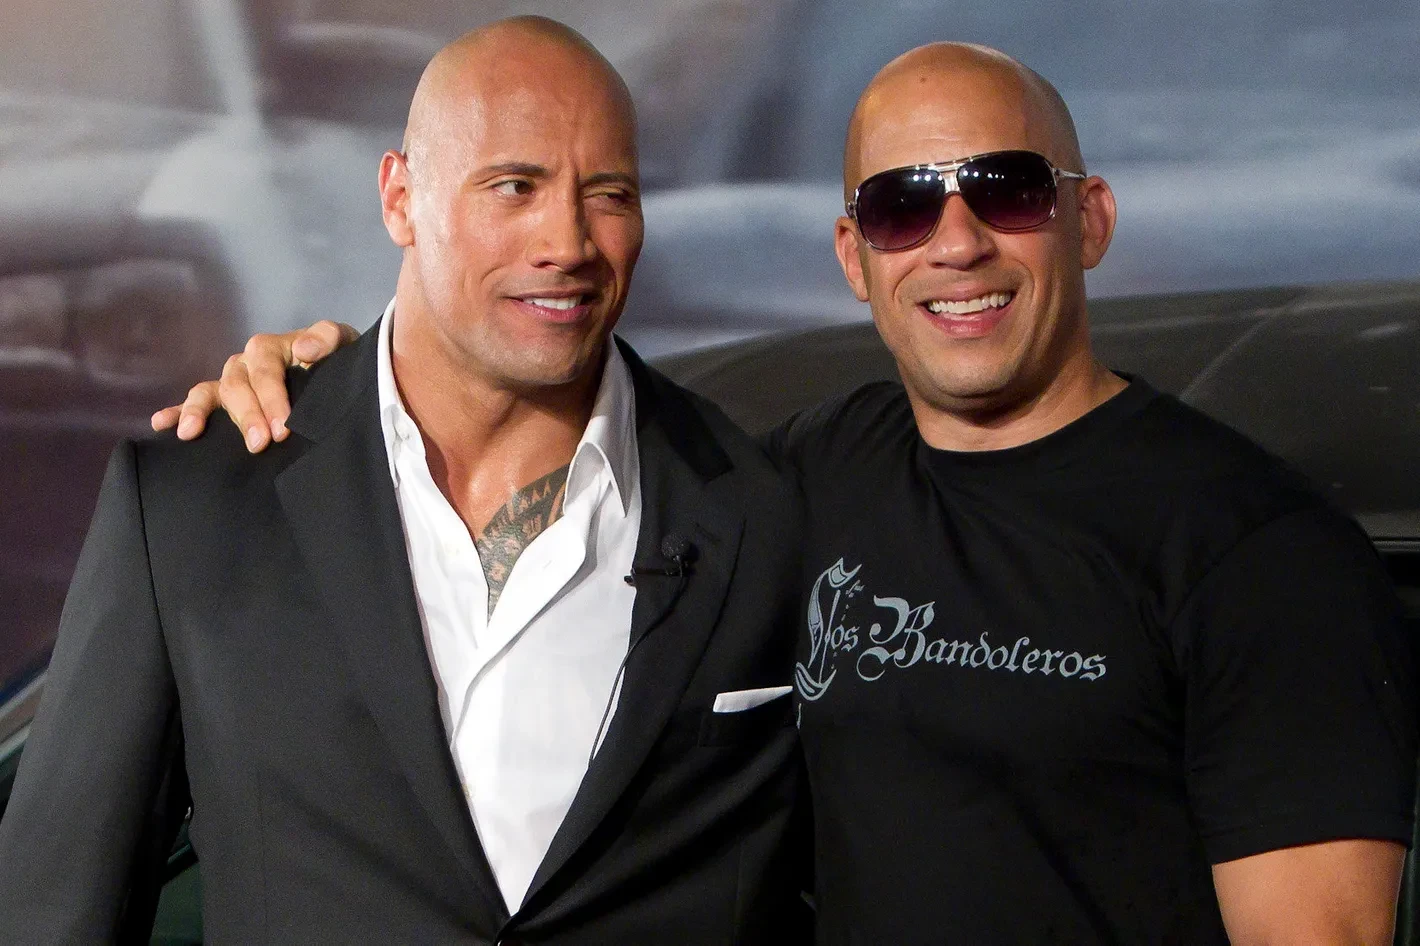 Dwayne Johnson and Vin Diesel are friends again